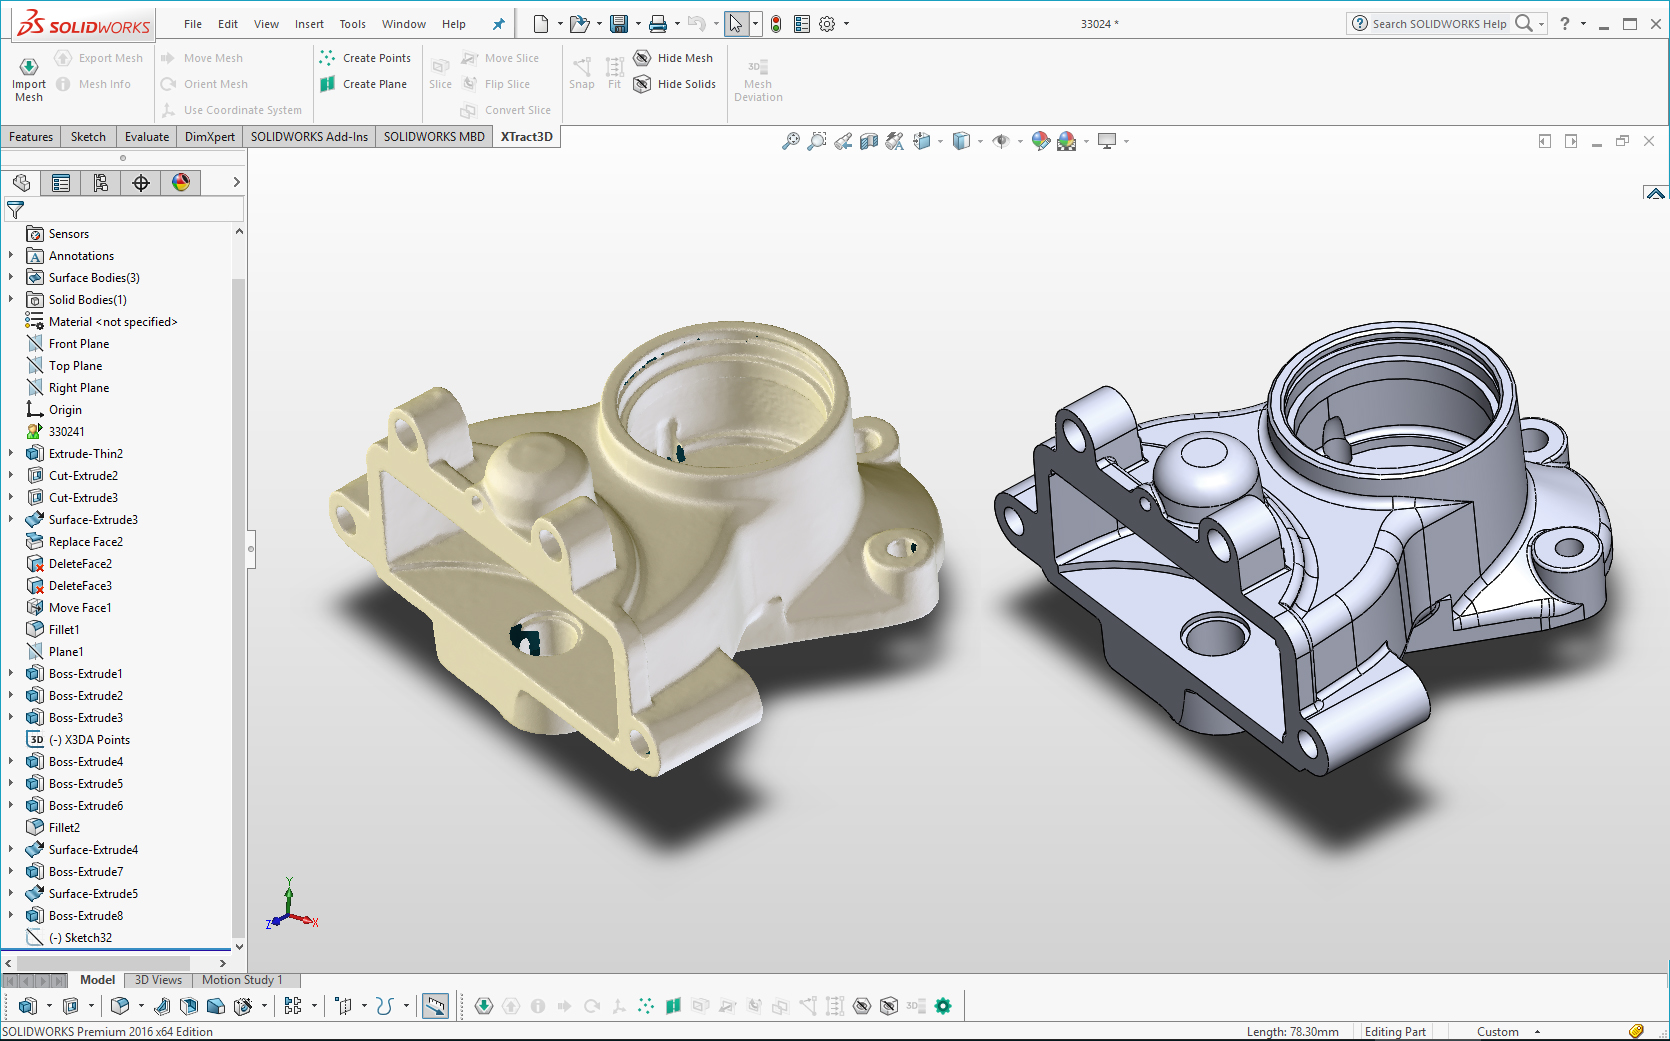 SOLIDWORKS software interface with XTract3D add-in